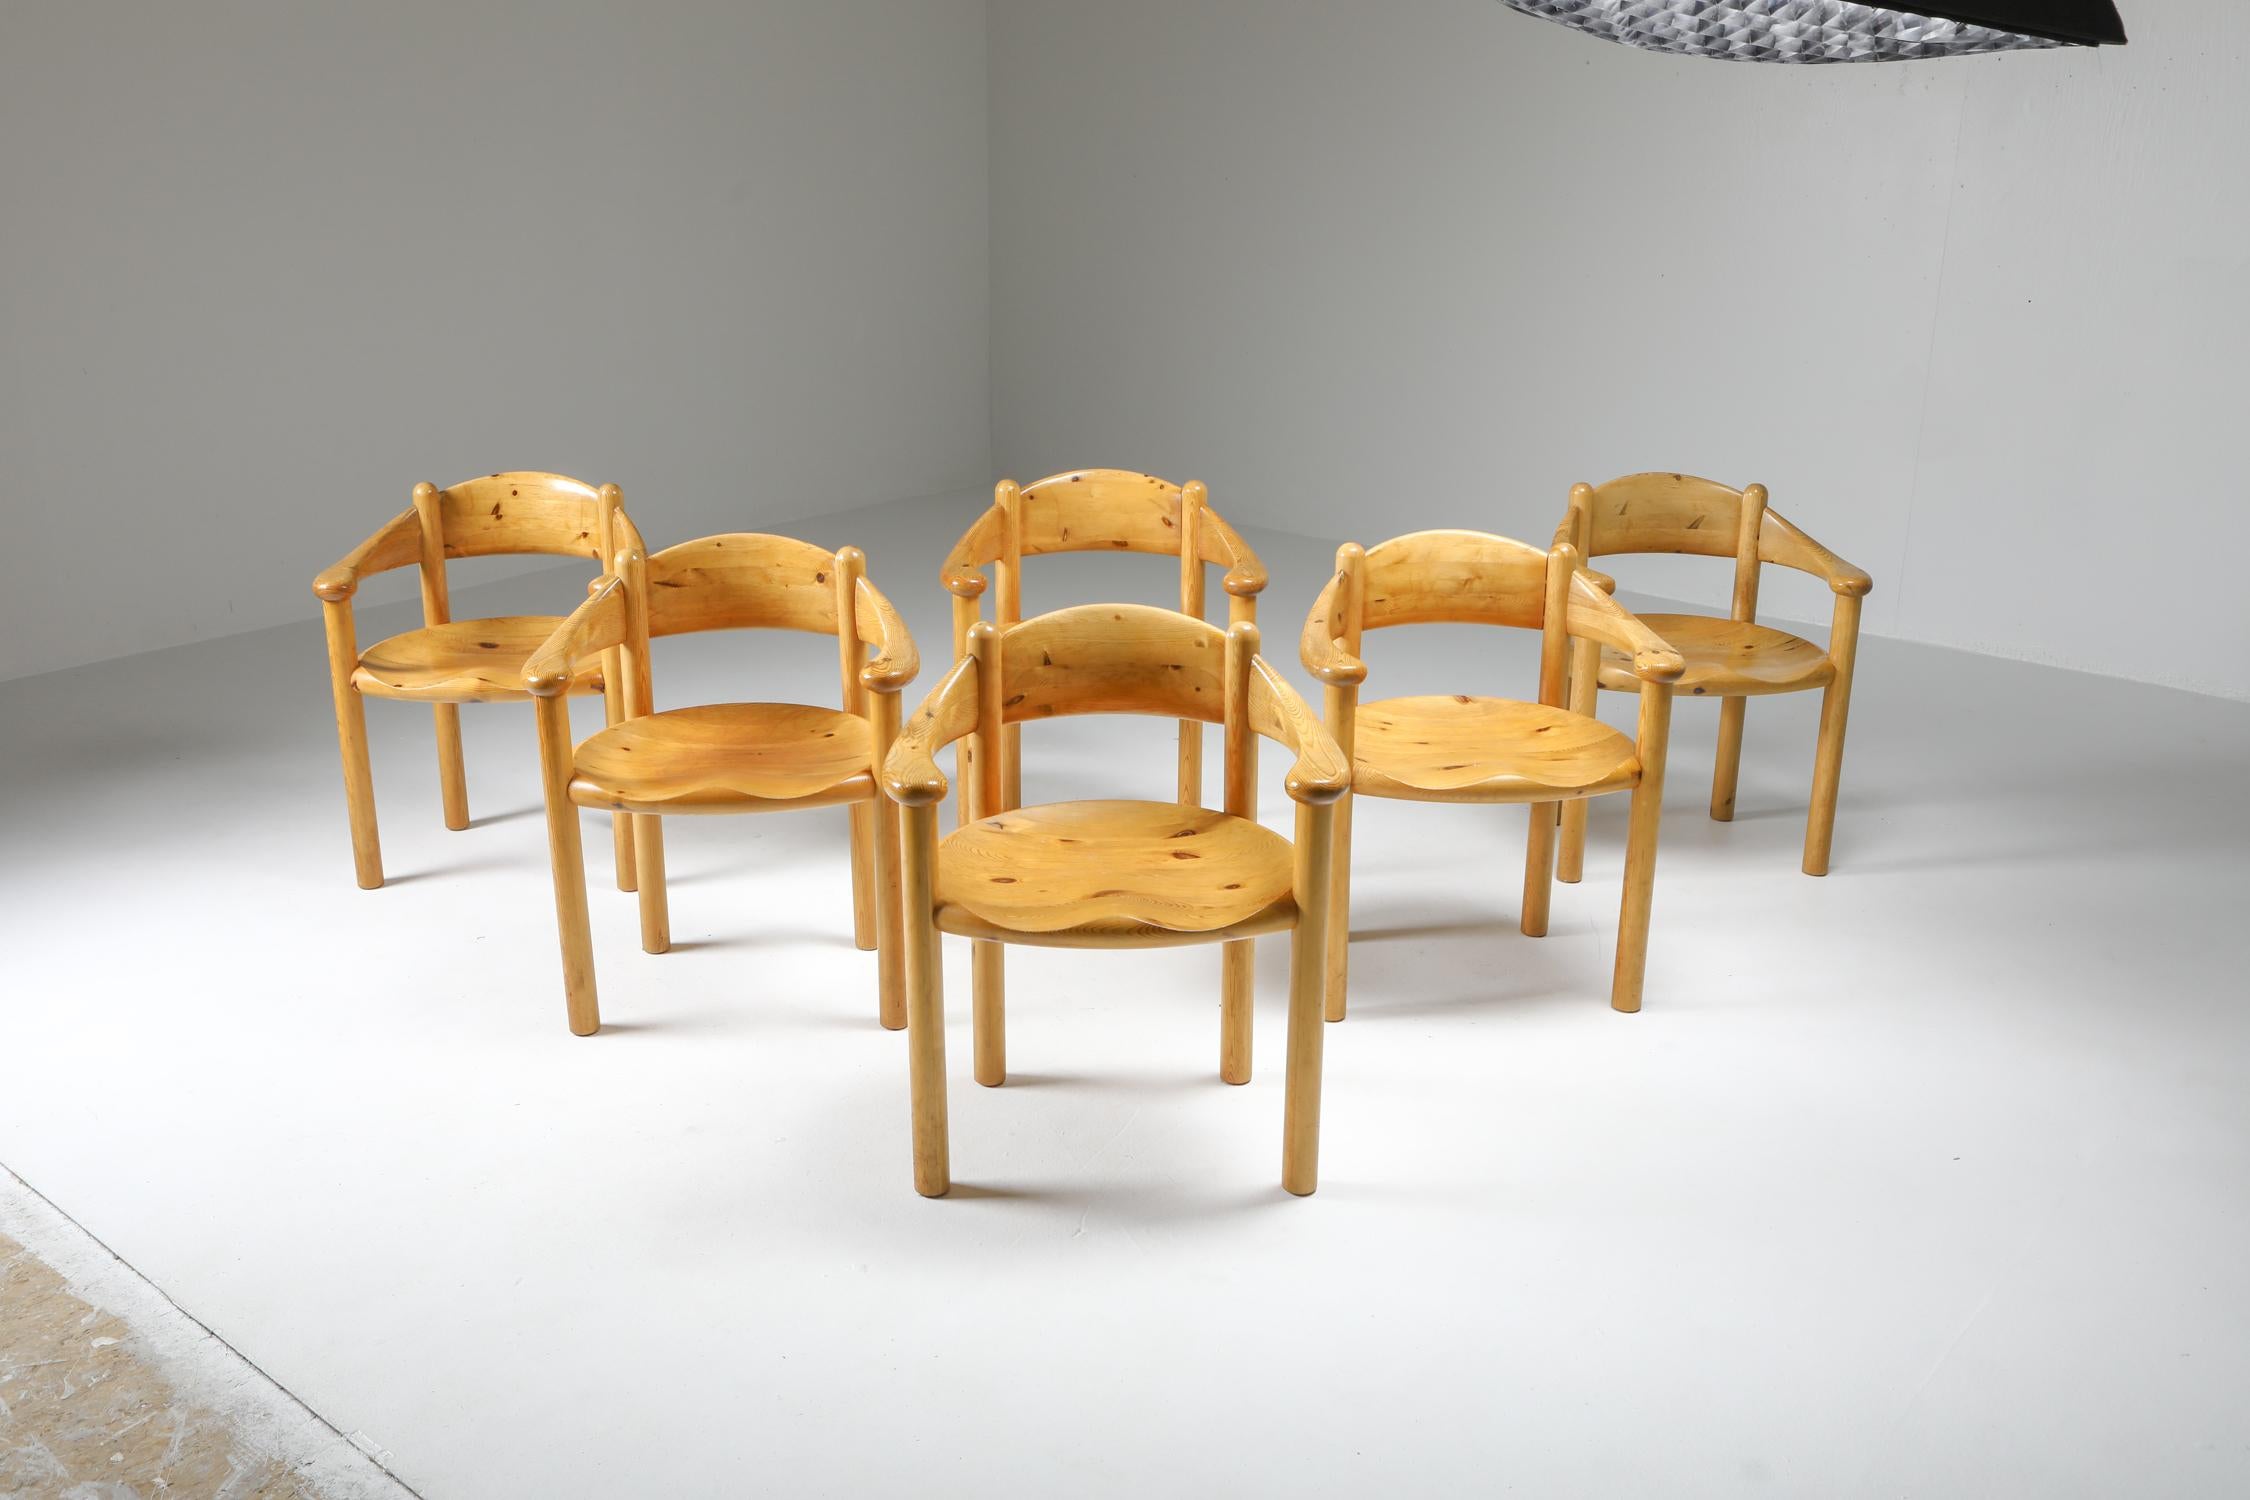 Rainer Daumiller, for Hirtshals Savvaerk, set of six armchairs, pine, Denmark, 1970s. 

Set of six armchairs in solid pine. 
A simplistic design with a round seating and full attention for the natural expression and grain of the wood. These